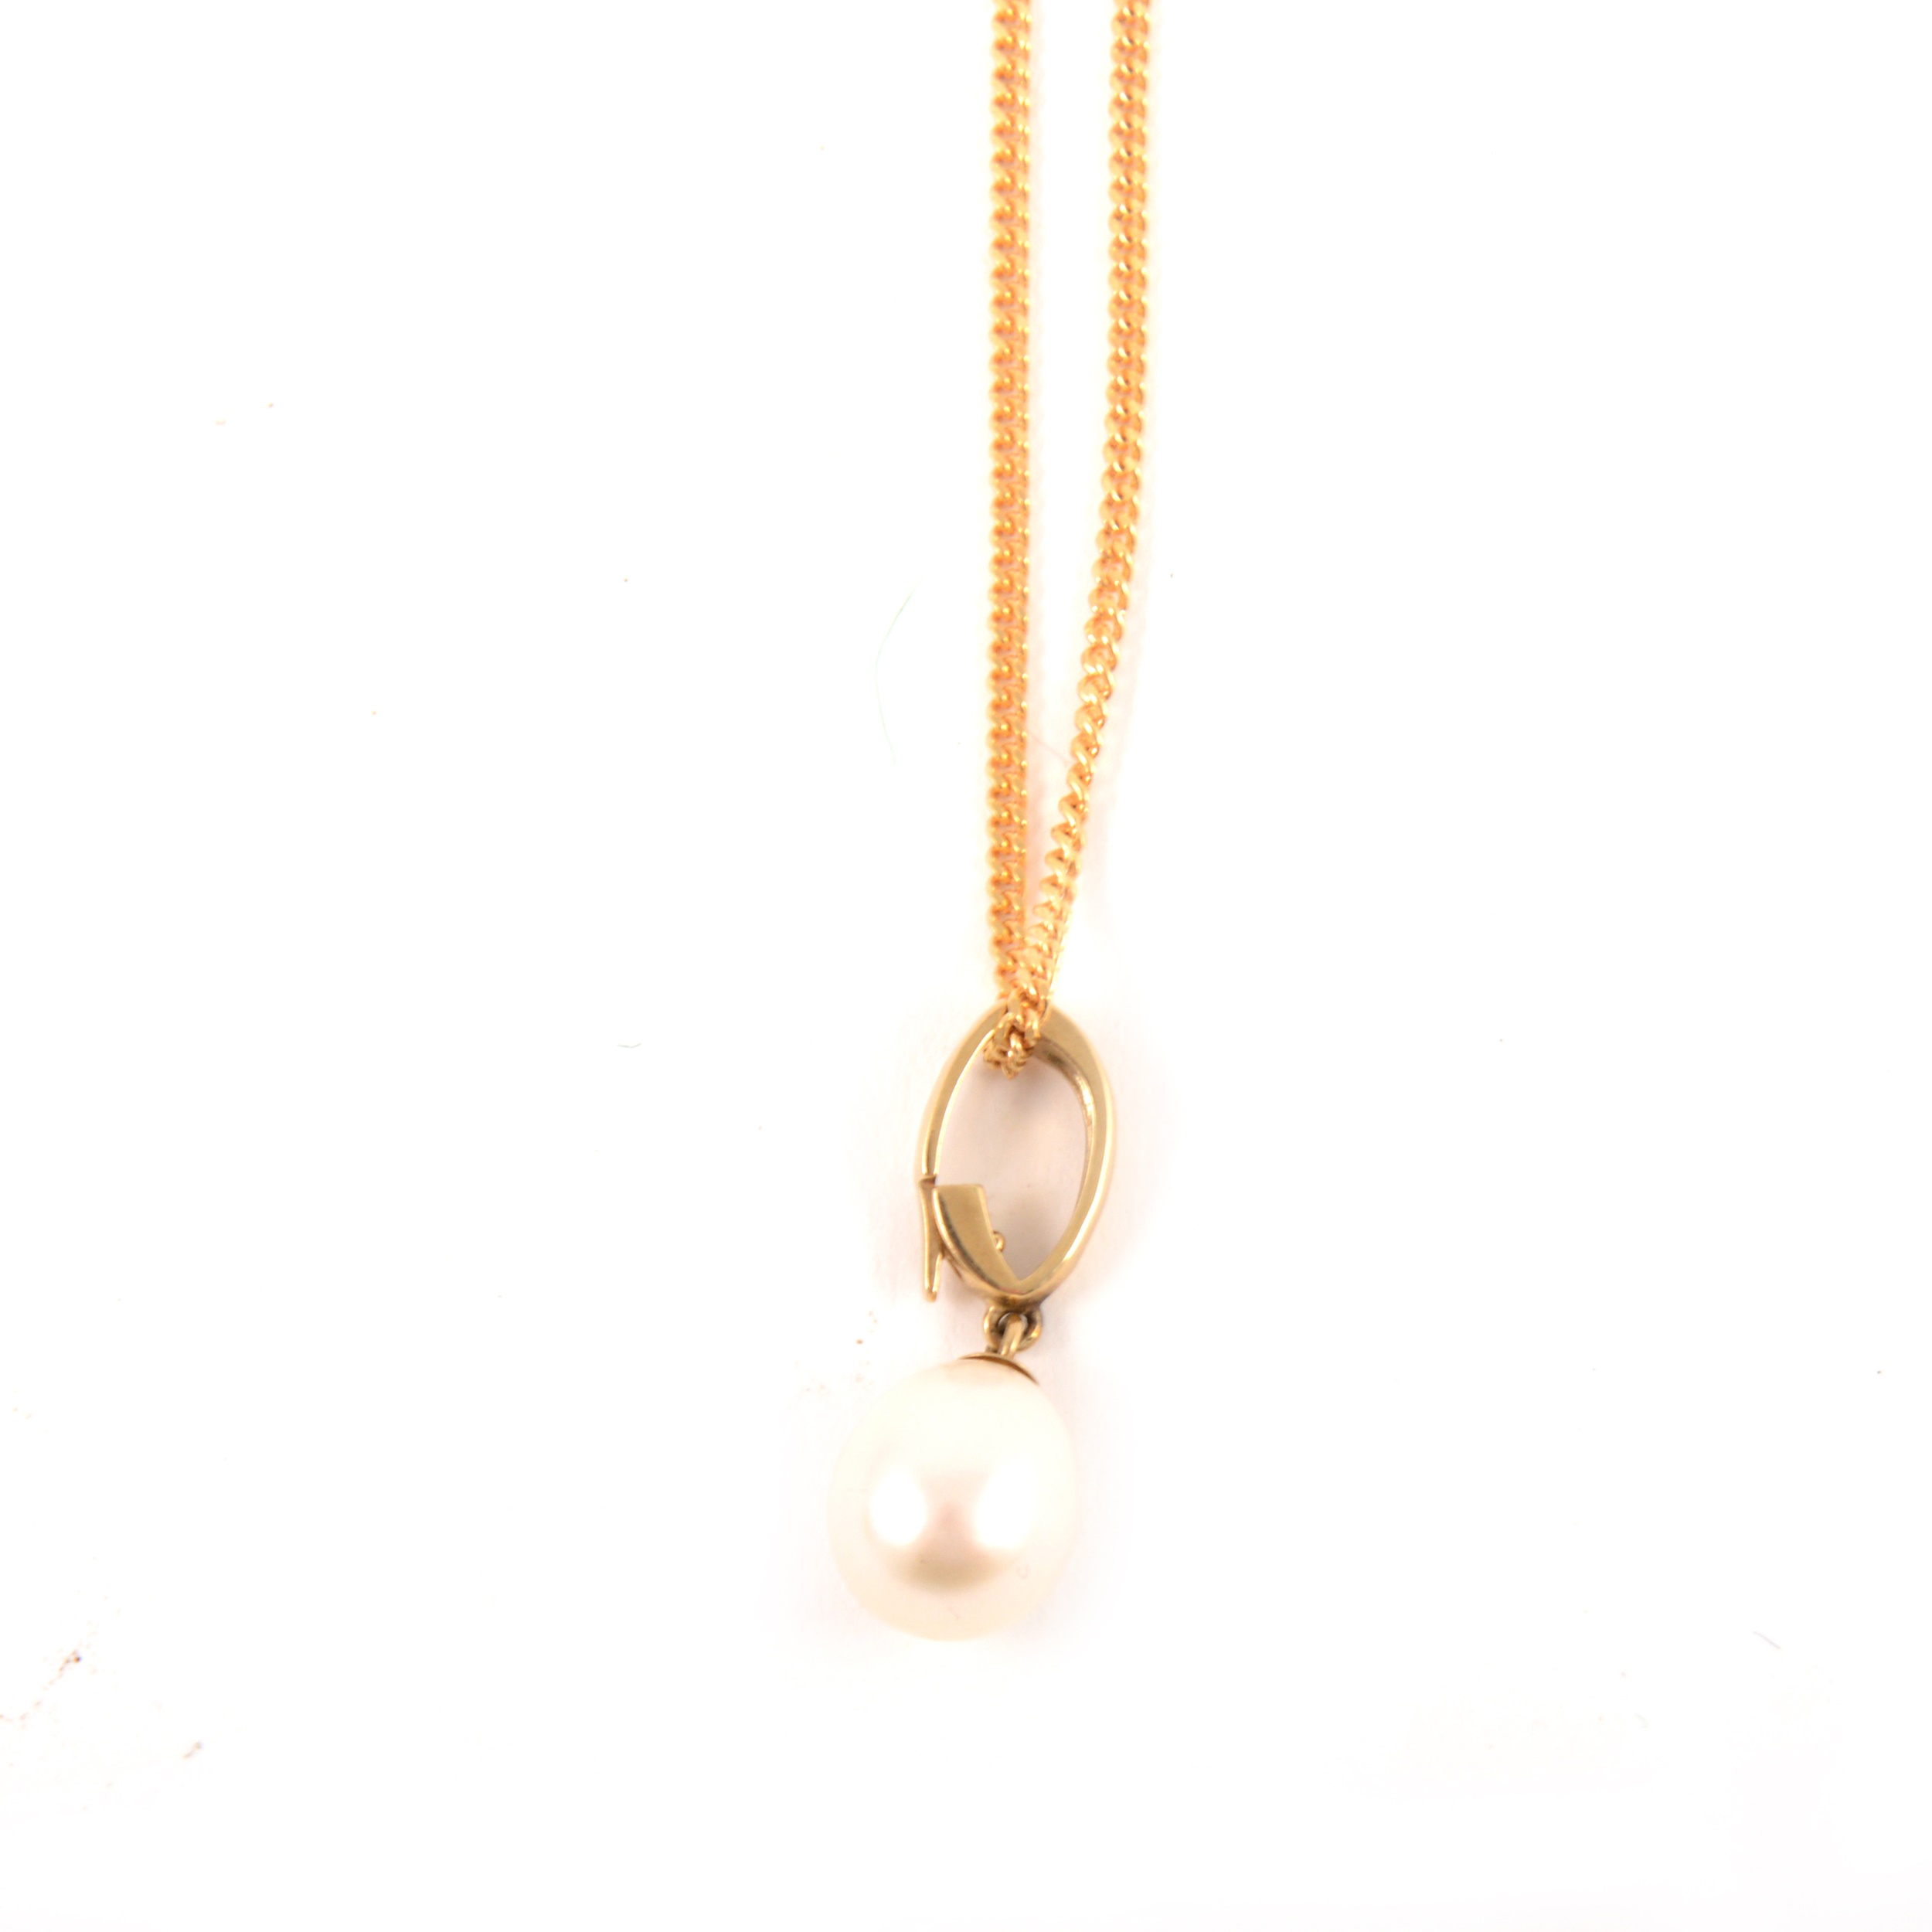 A pearl drop pendant and chain.